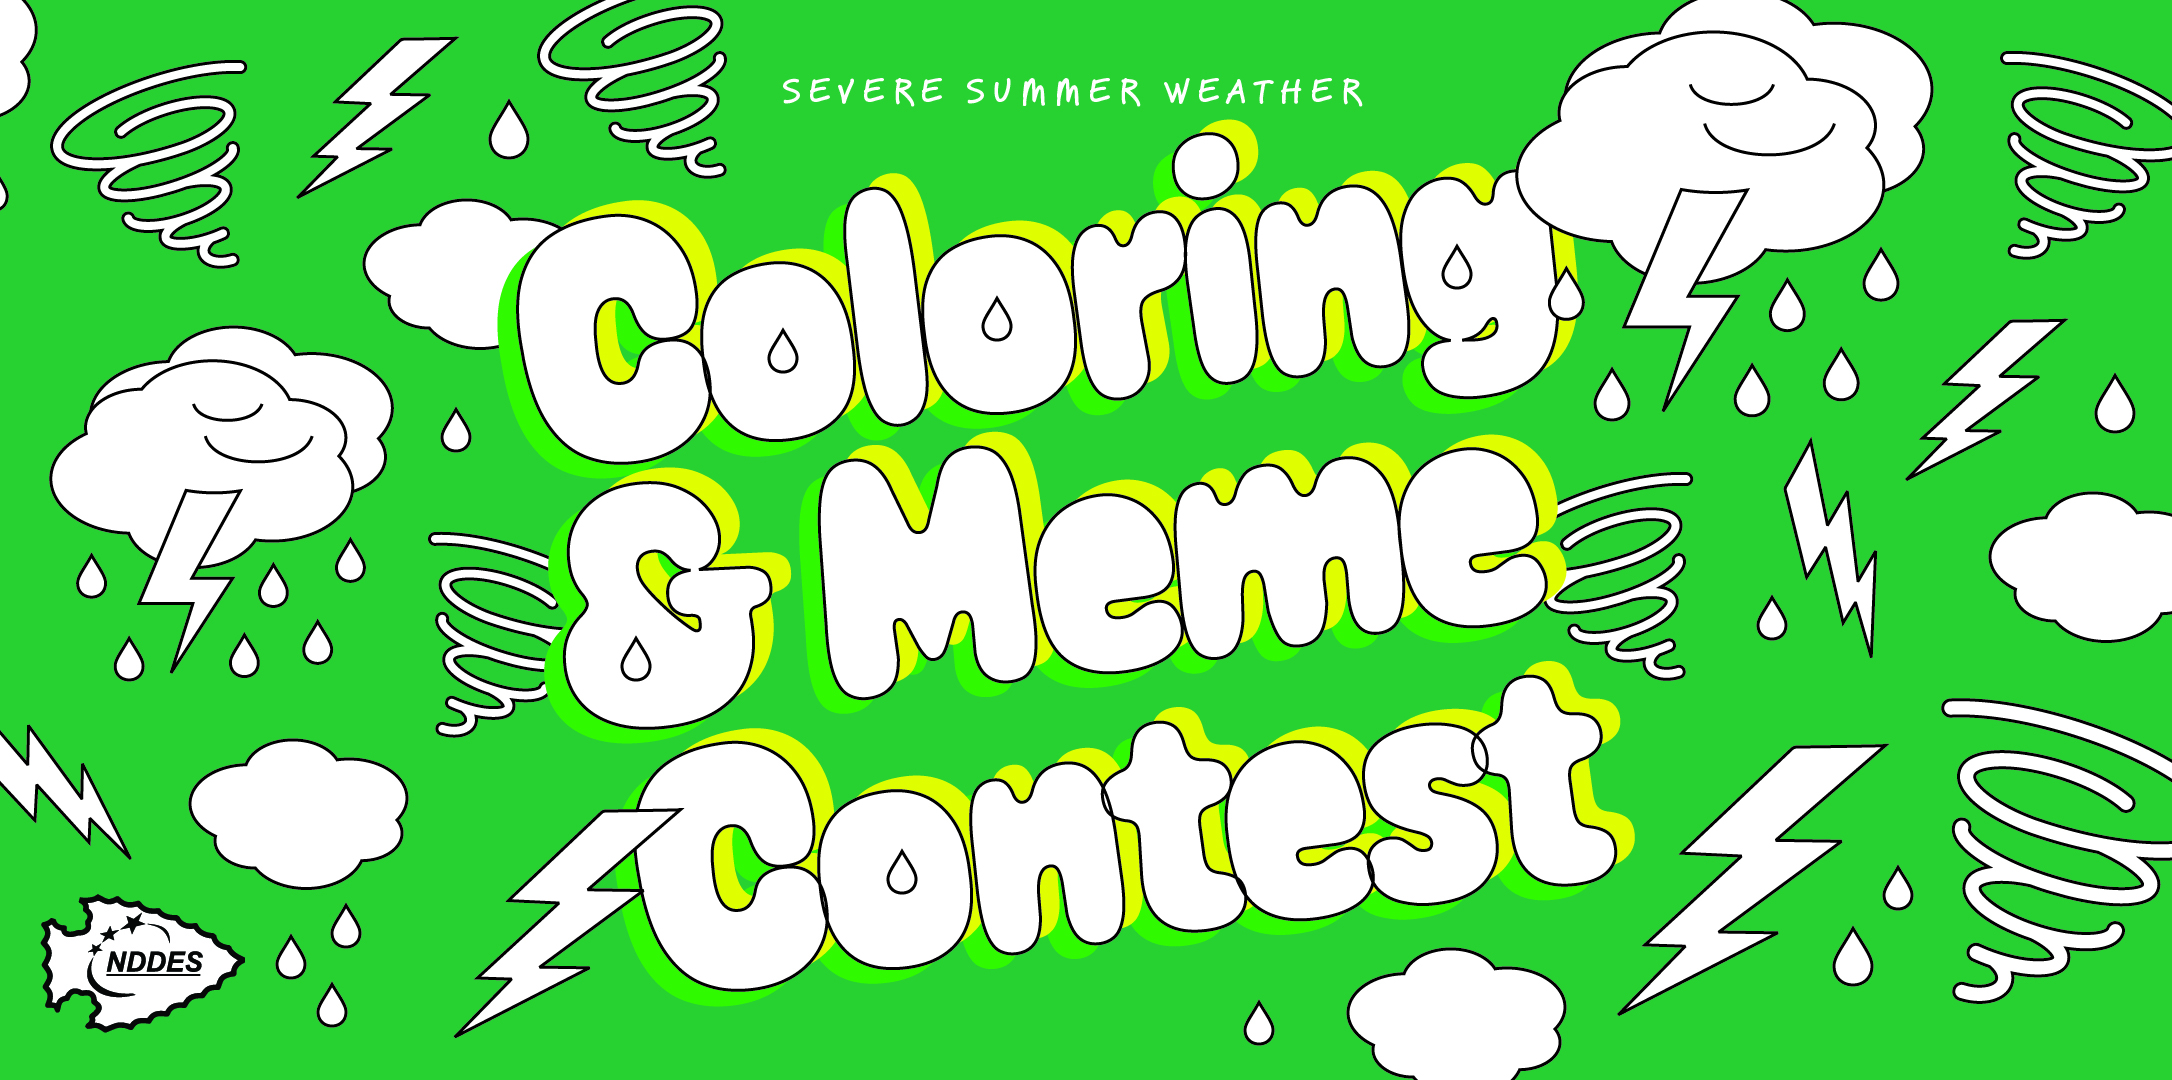 Coloring and Meme Contest